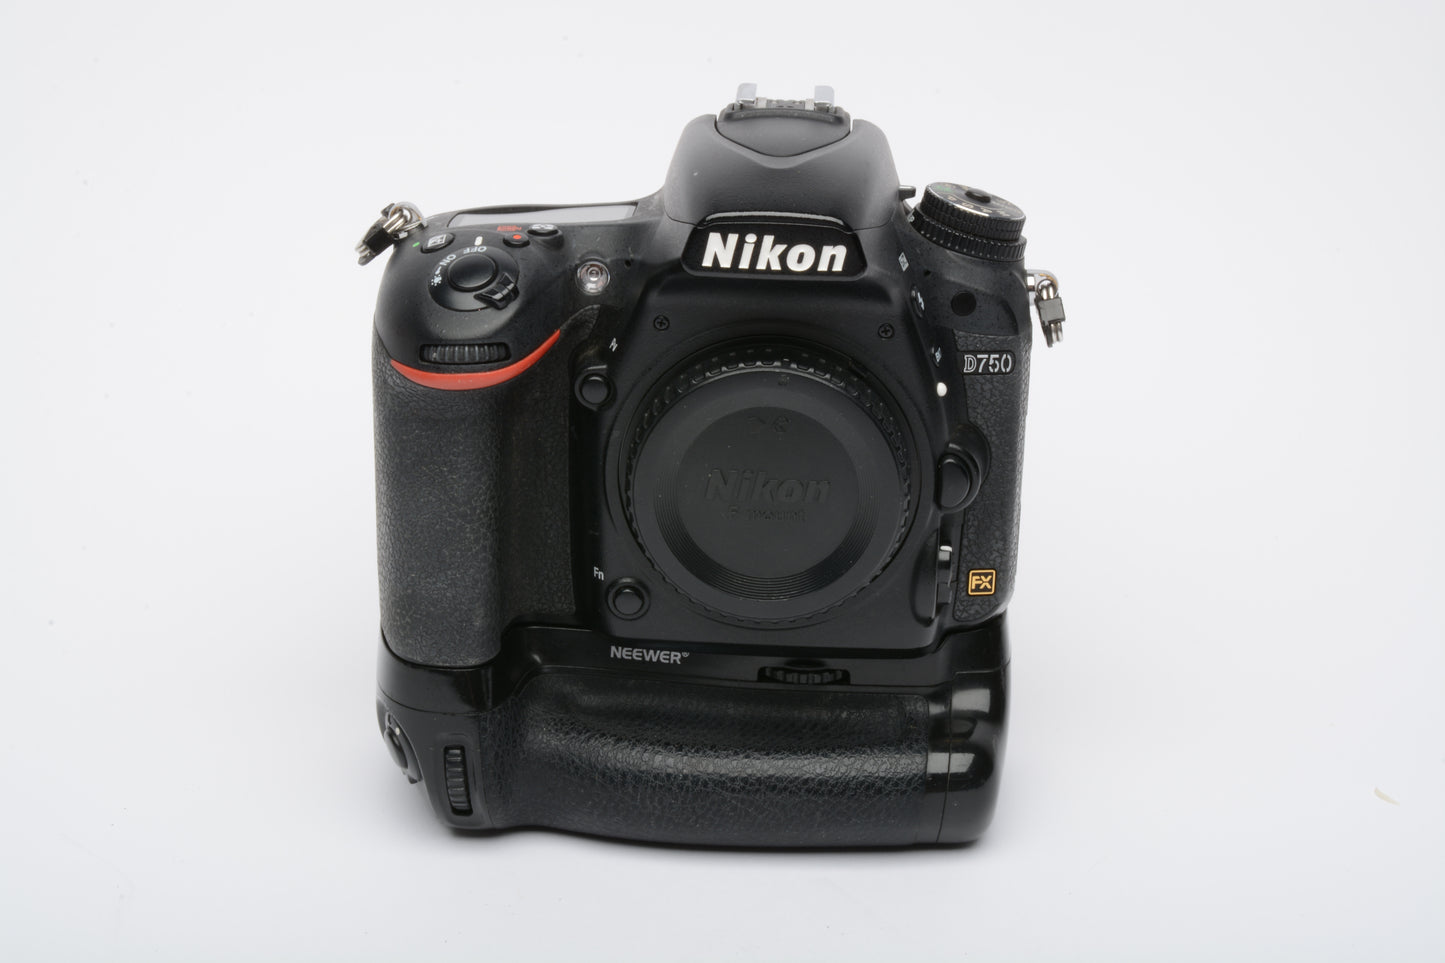 Nikon D750 DSLR Body 24.3MP, 2 batts+charger+grip, 42K Acts, tested